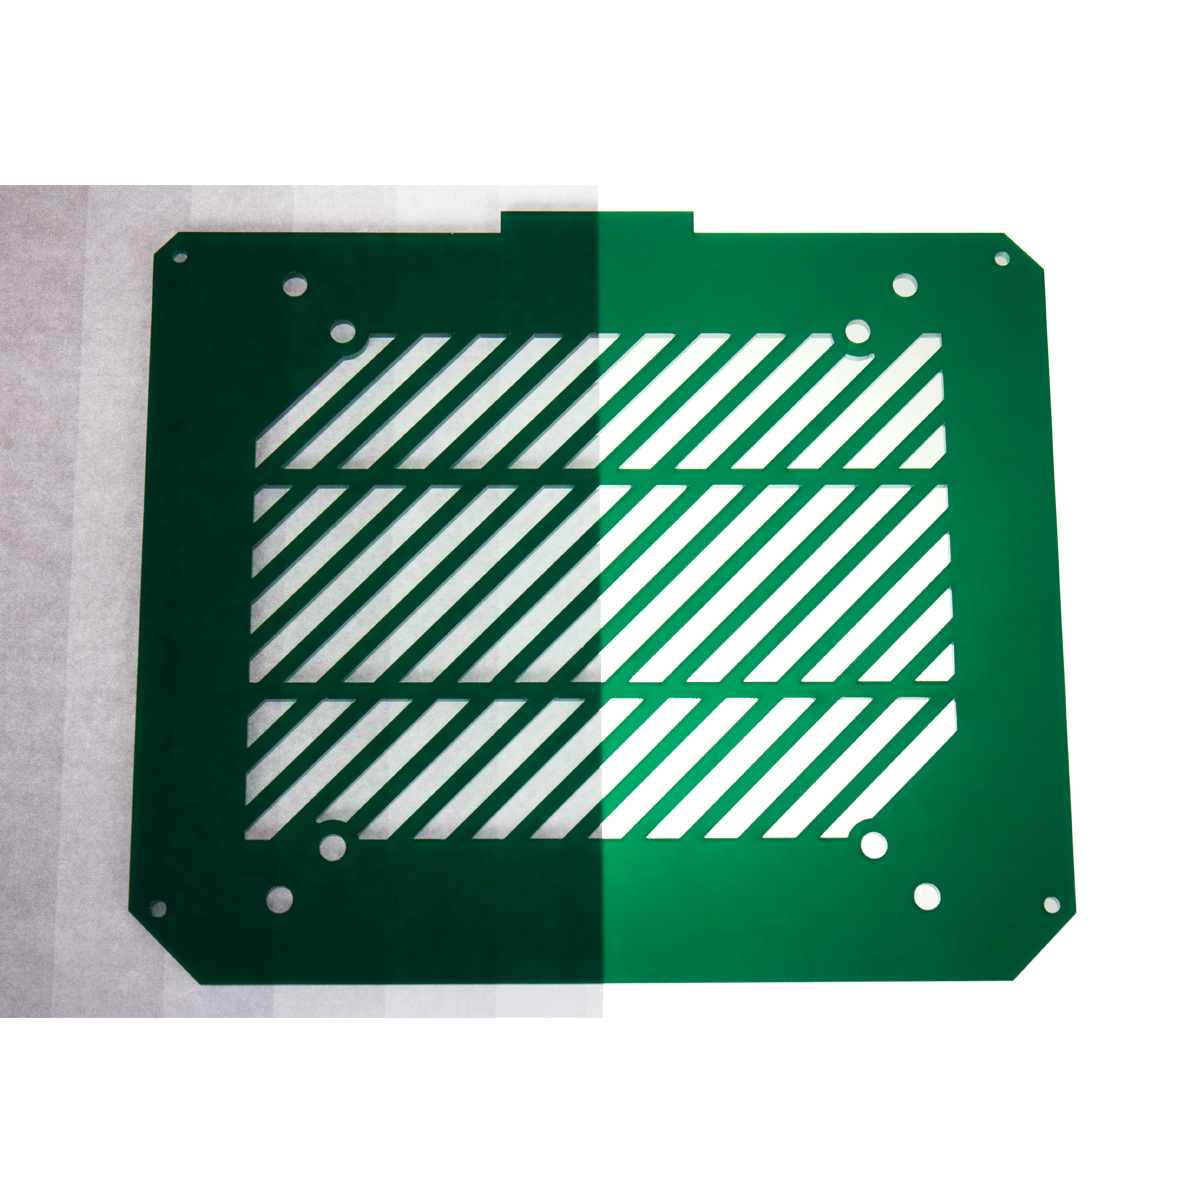 Lazer3D LZ7 Left Panel - Emerald Green Slotted